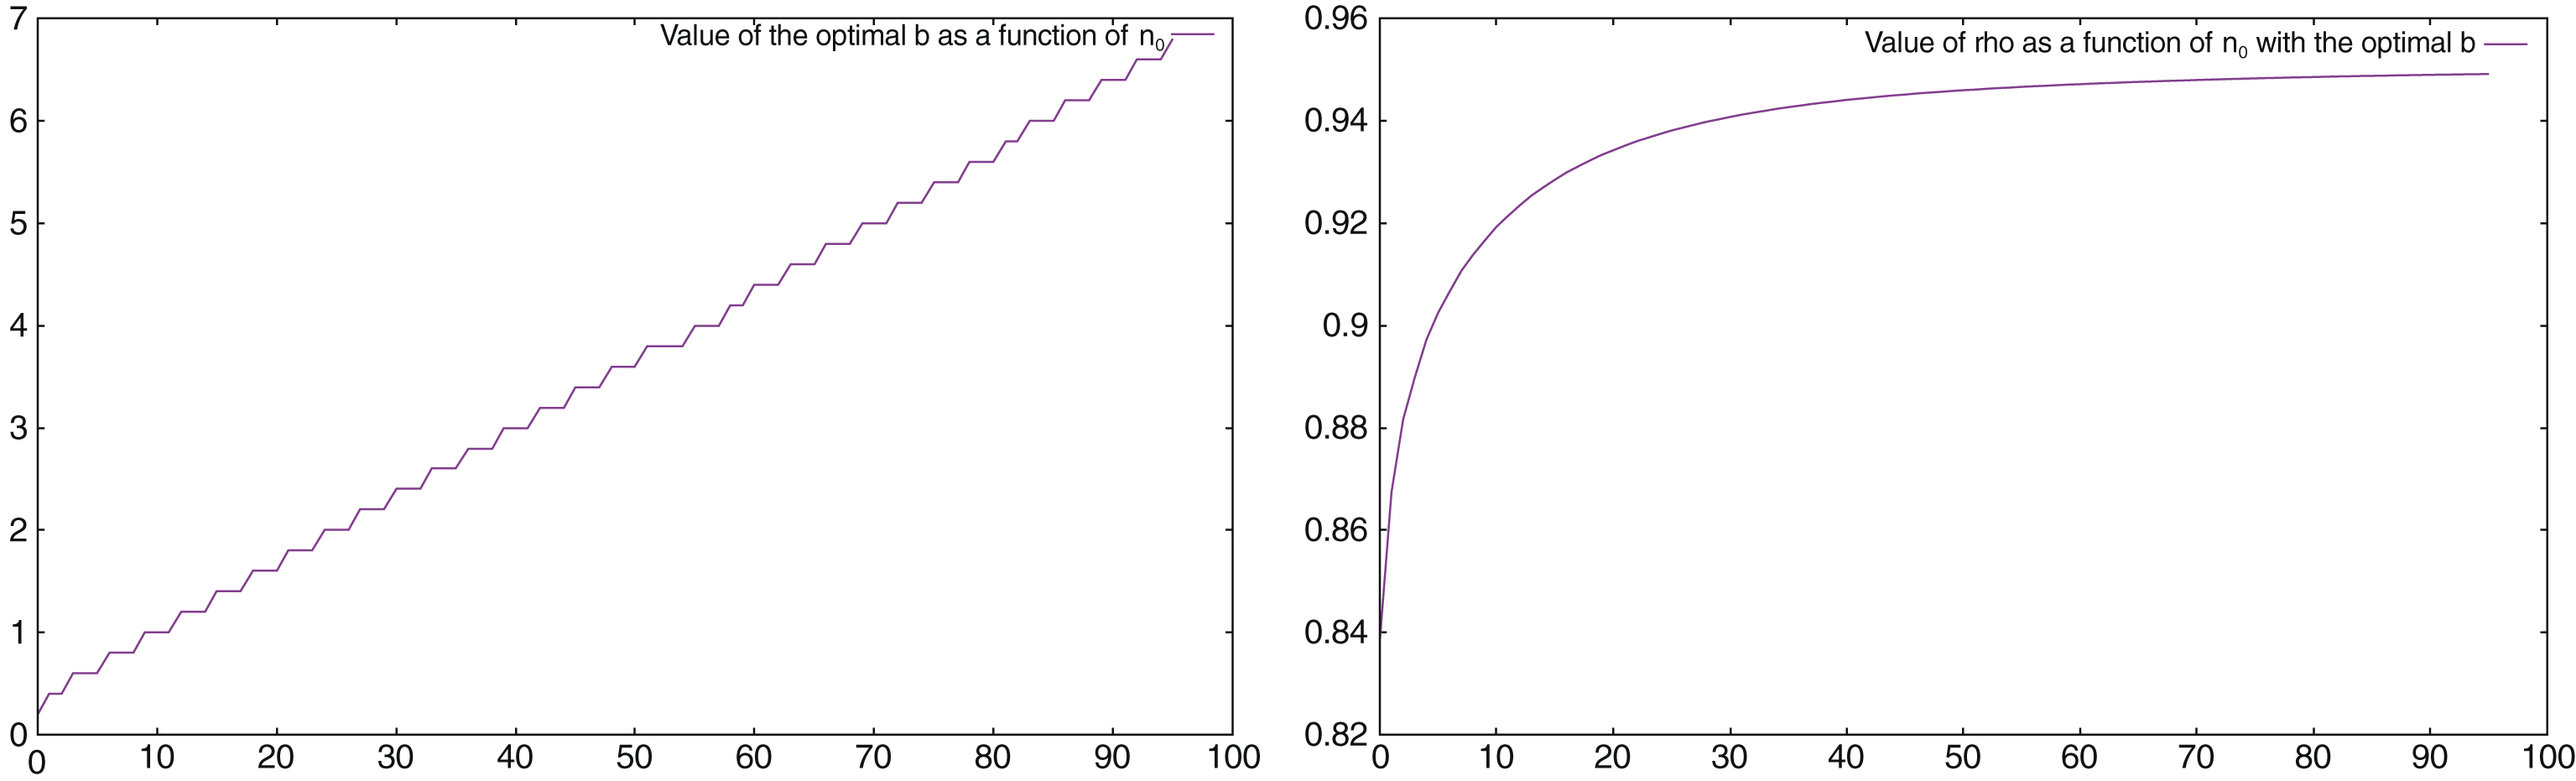 Value of the optimal b (left), and of ρ with the optimal b (right), as a function of n0.